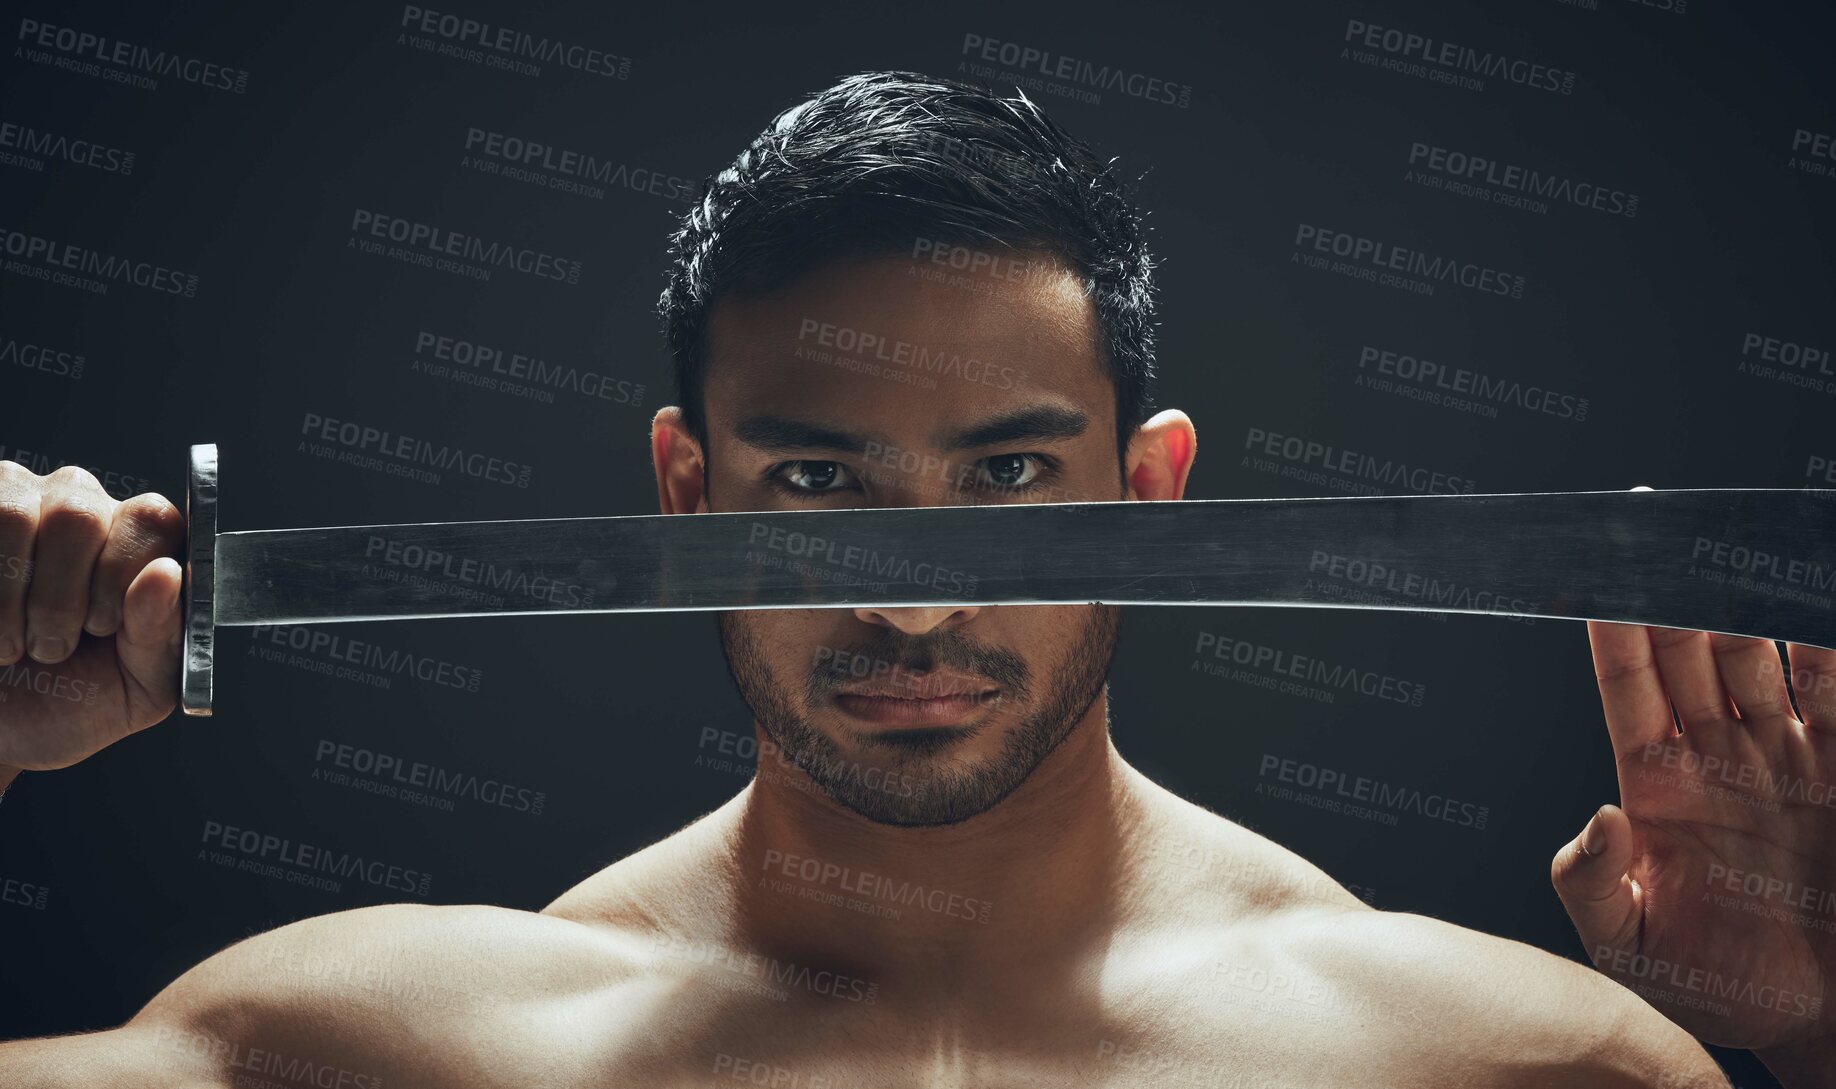 Buy stock photo Shot of a handsome young man standing alone in the studio and posing with a broadsword